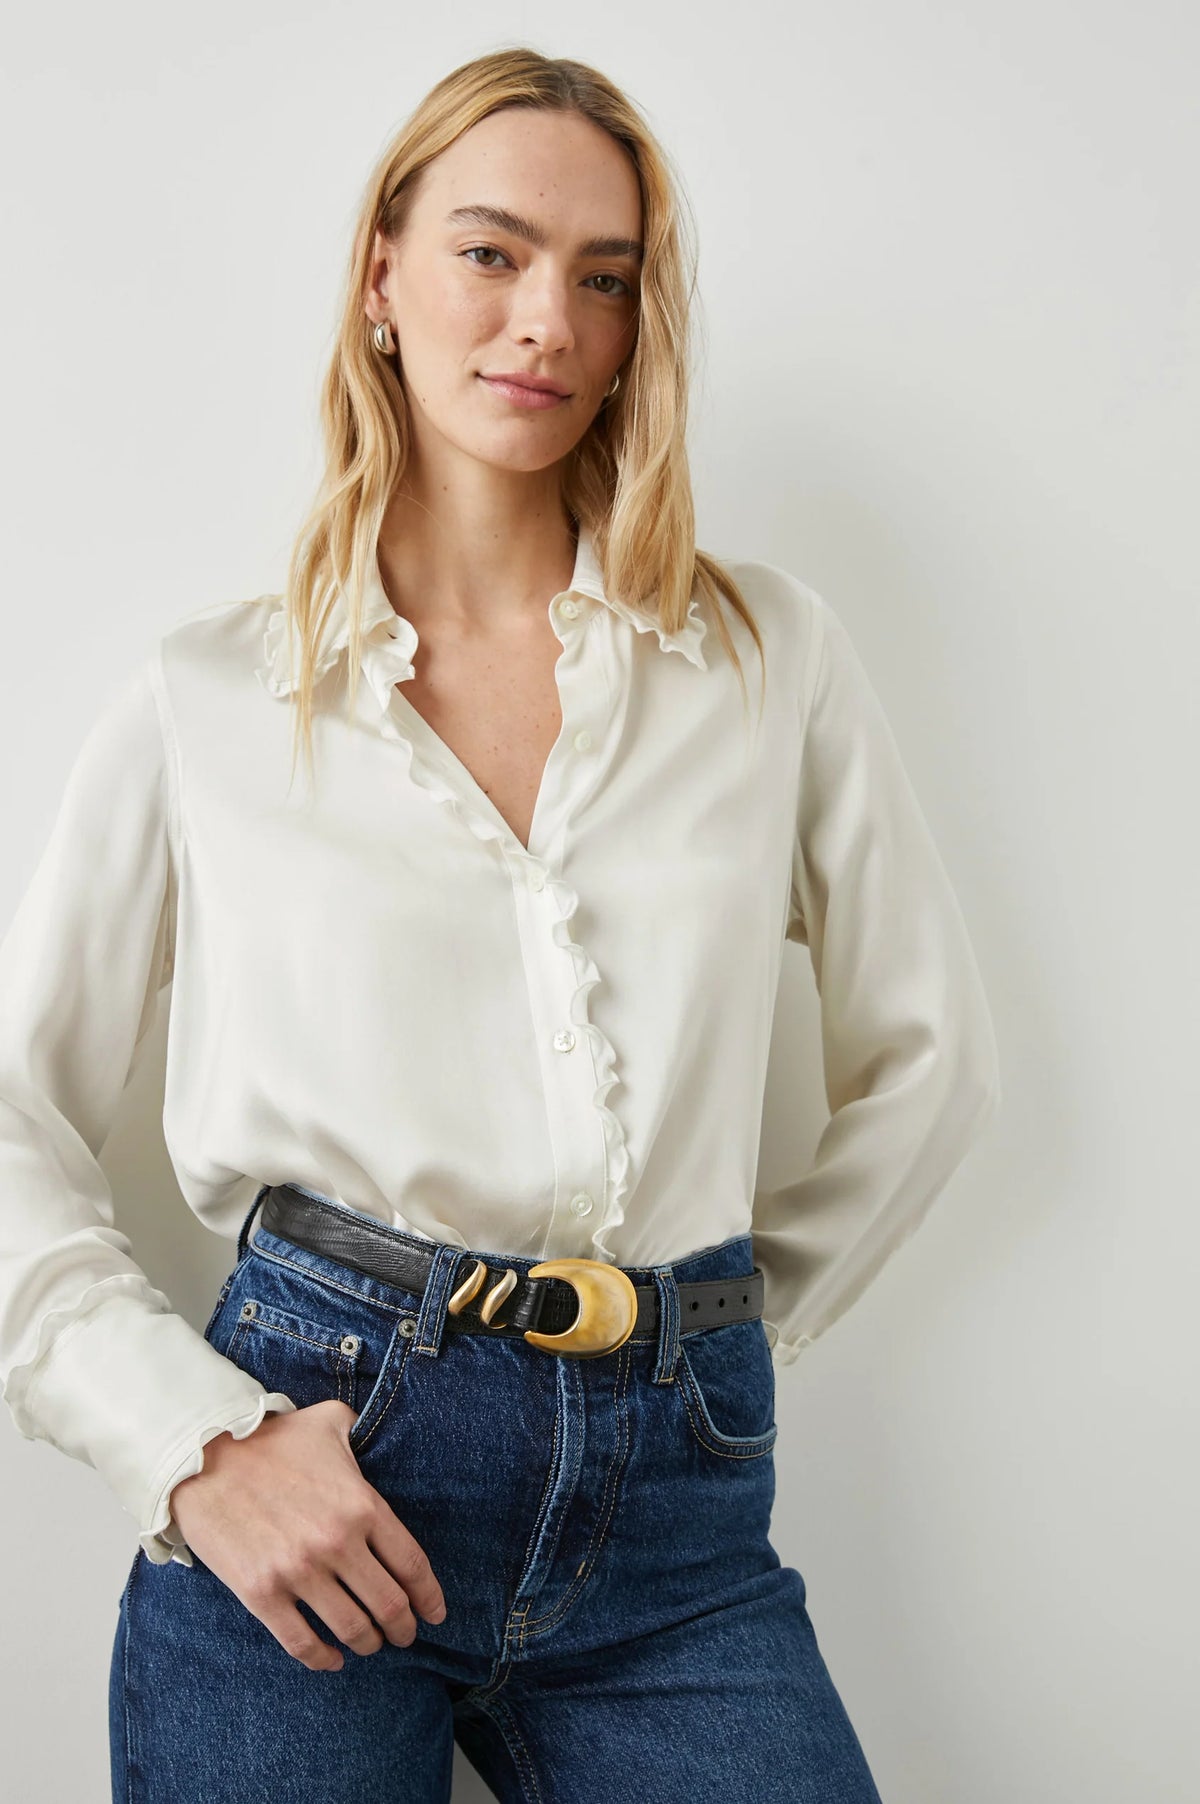 Silk ivory shirt with ruffle details